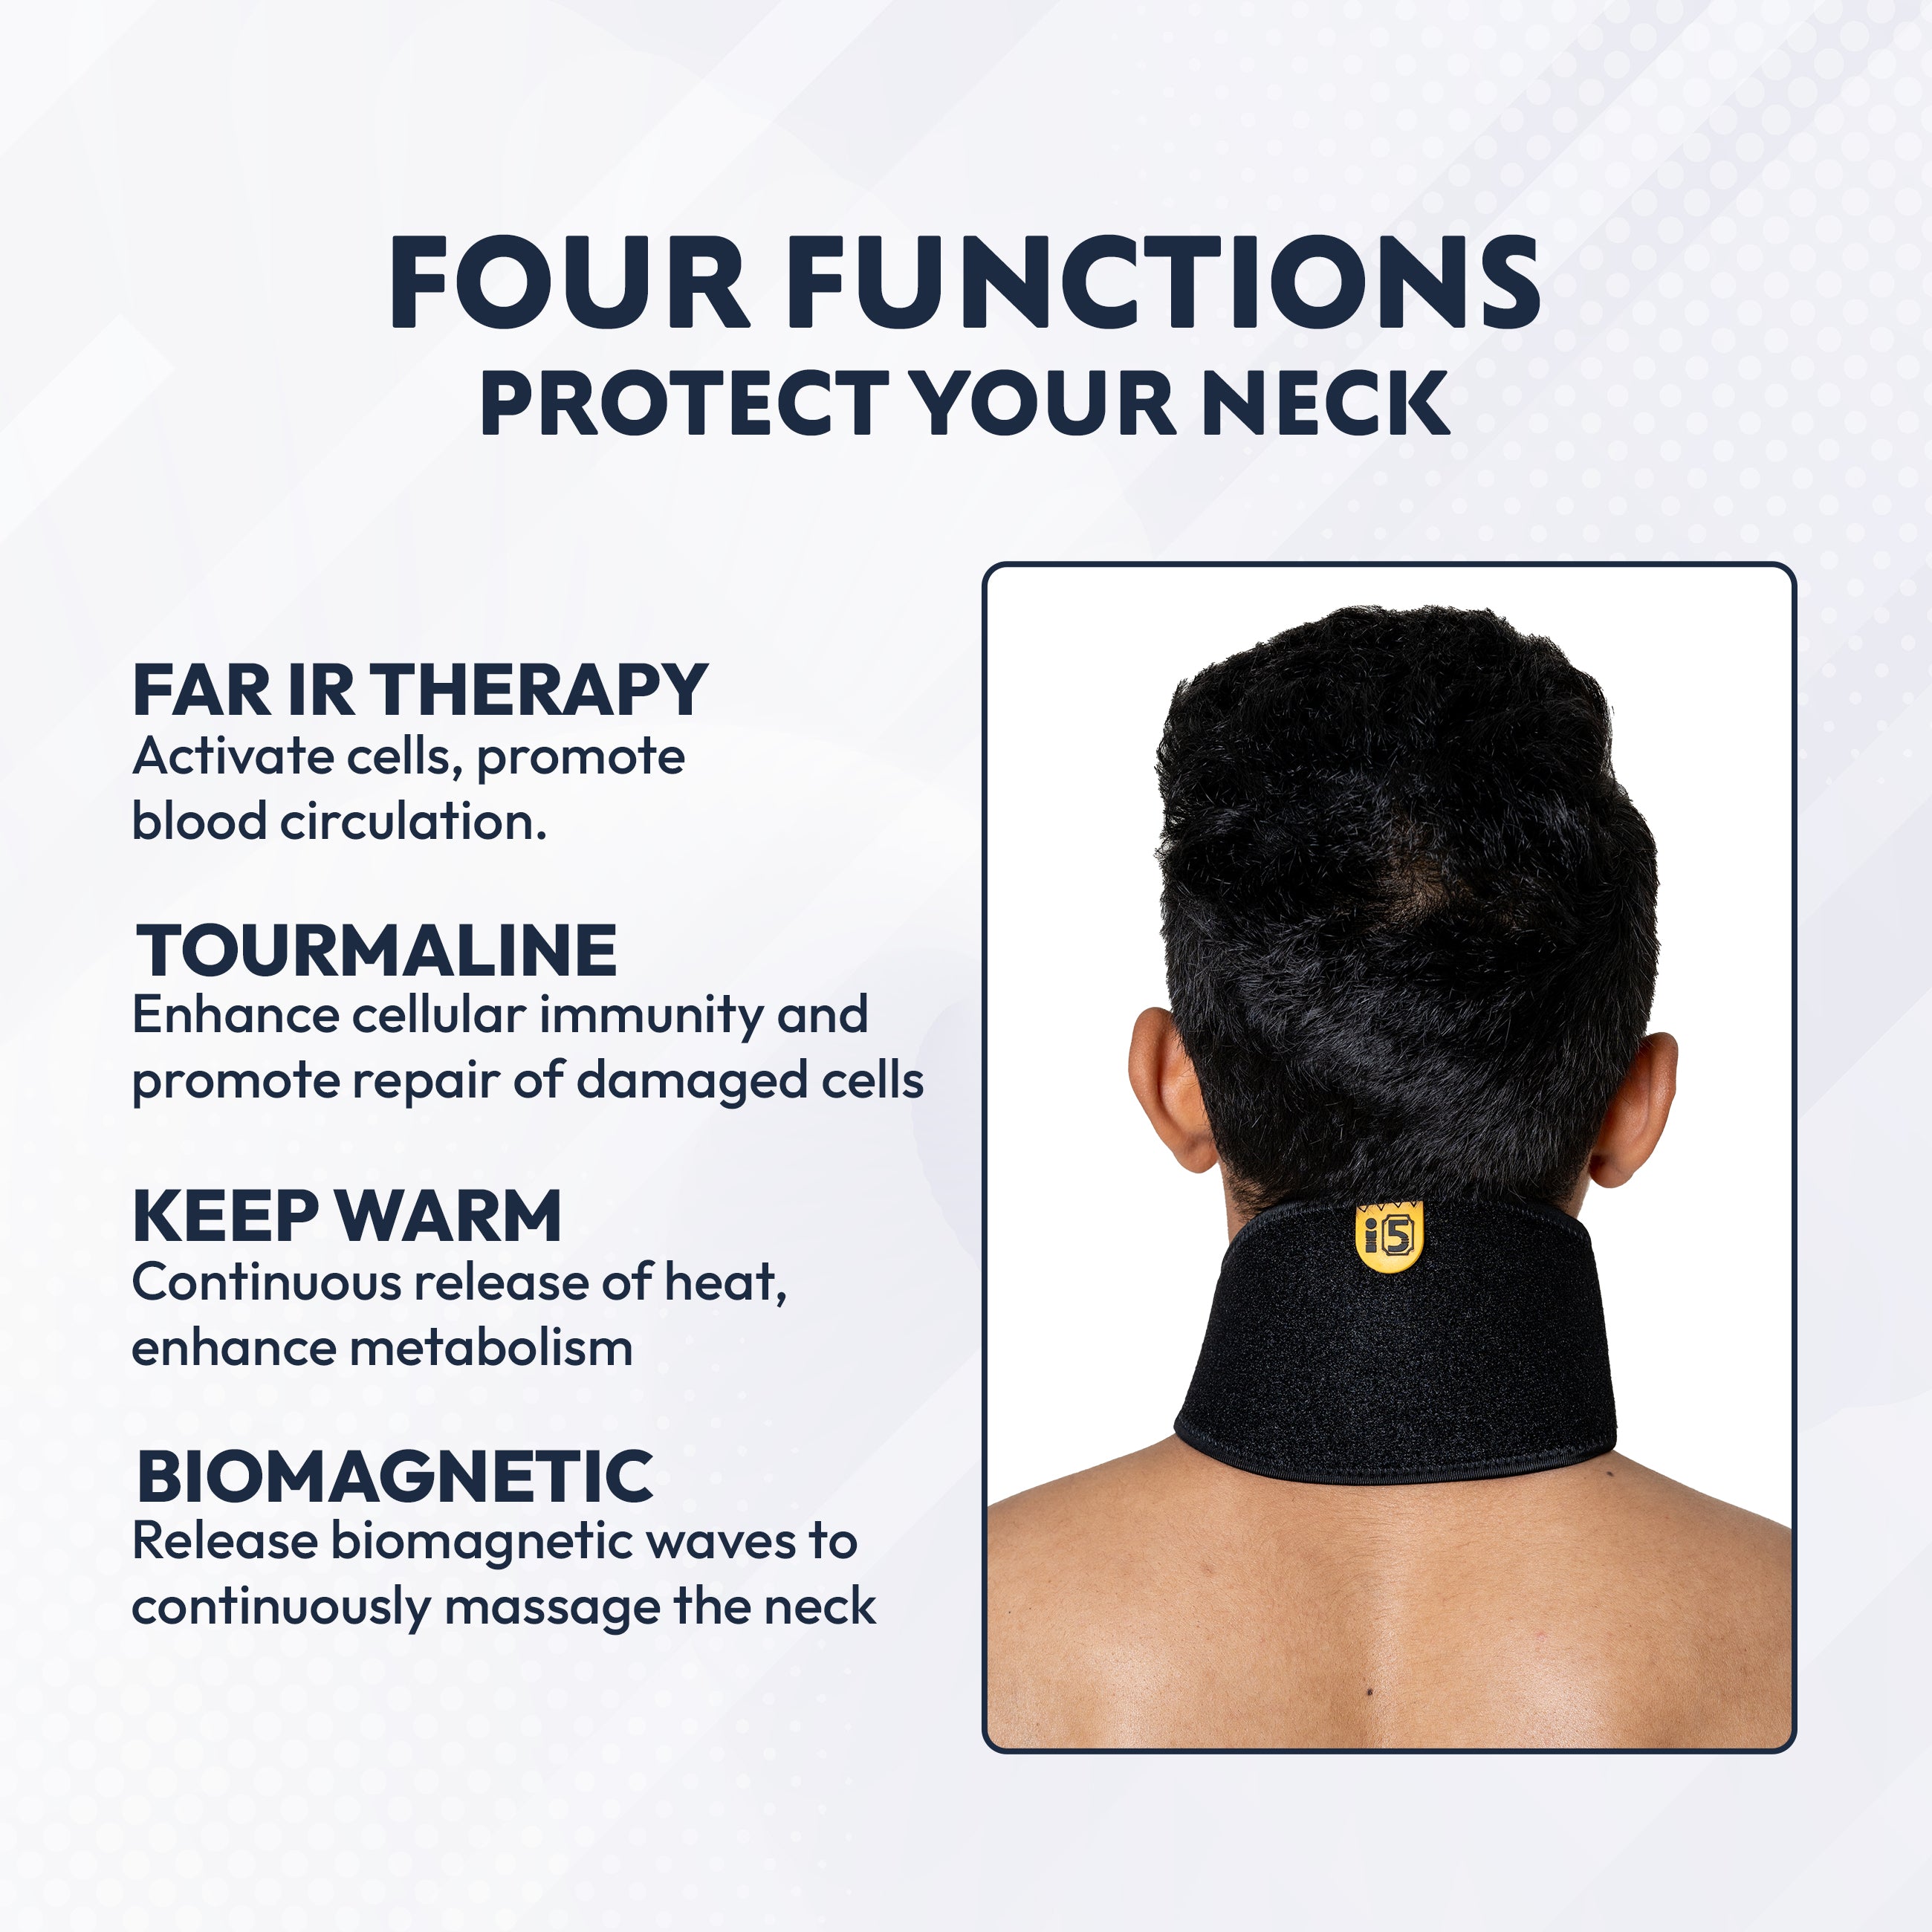 I5Joints-Far Infrared Neck Support(SELF HEAT MAGNET)(Neck Infrared Heat Neck Support, Adjustable Neck Brace With Extra Support, Relieves Pain, Stress & Pressure in Spine)